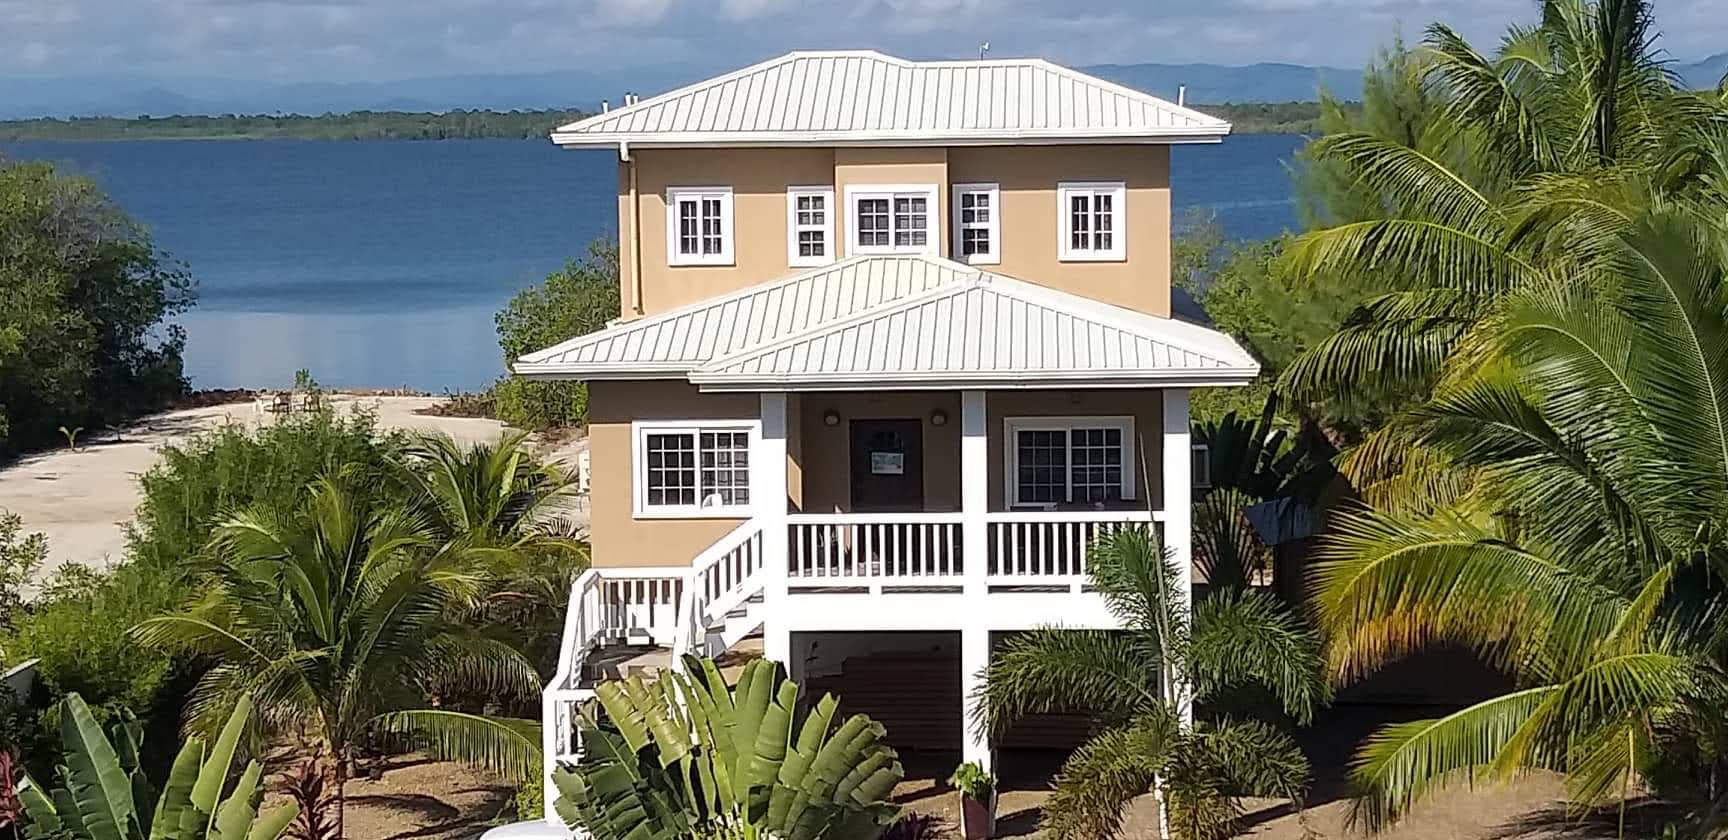 $1 Million Can Get You a Lot of Home in Belize - Mansion 